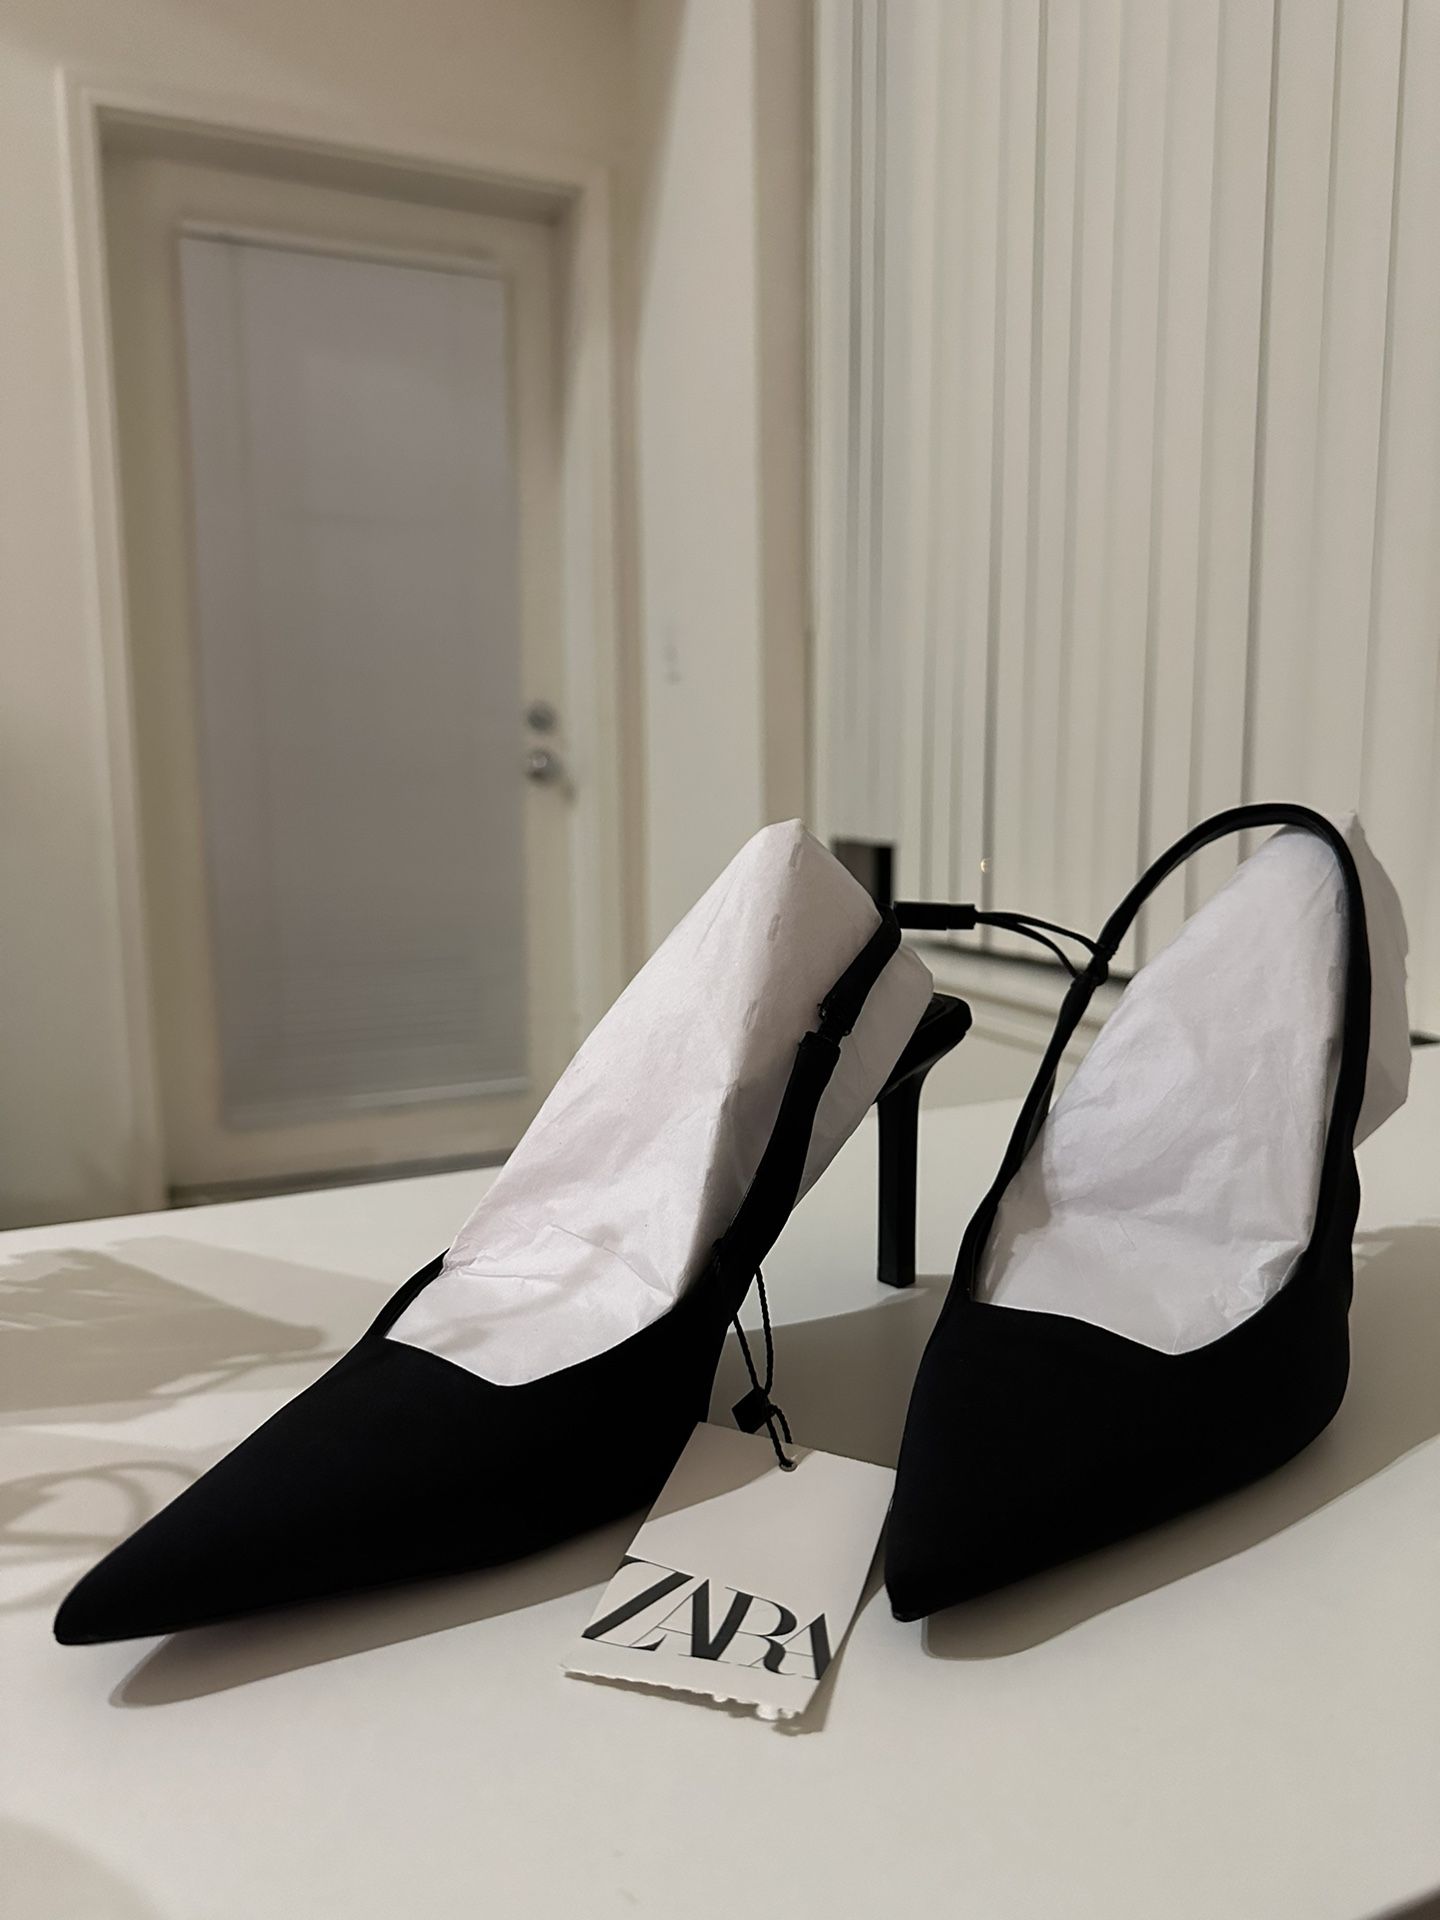 Zara Black shoes with a pointed toe. Size 6 1/2, 24cm 